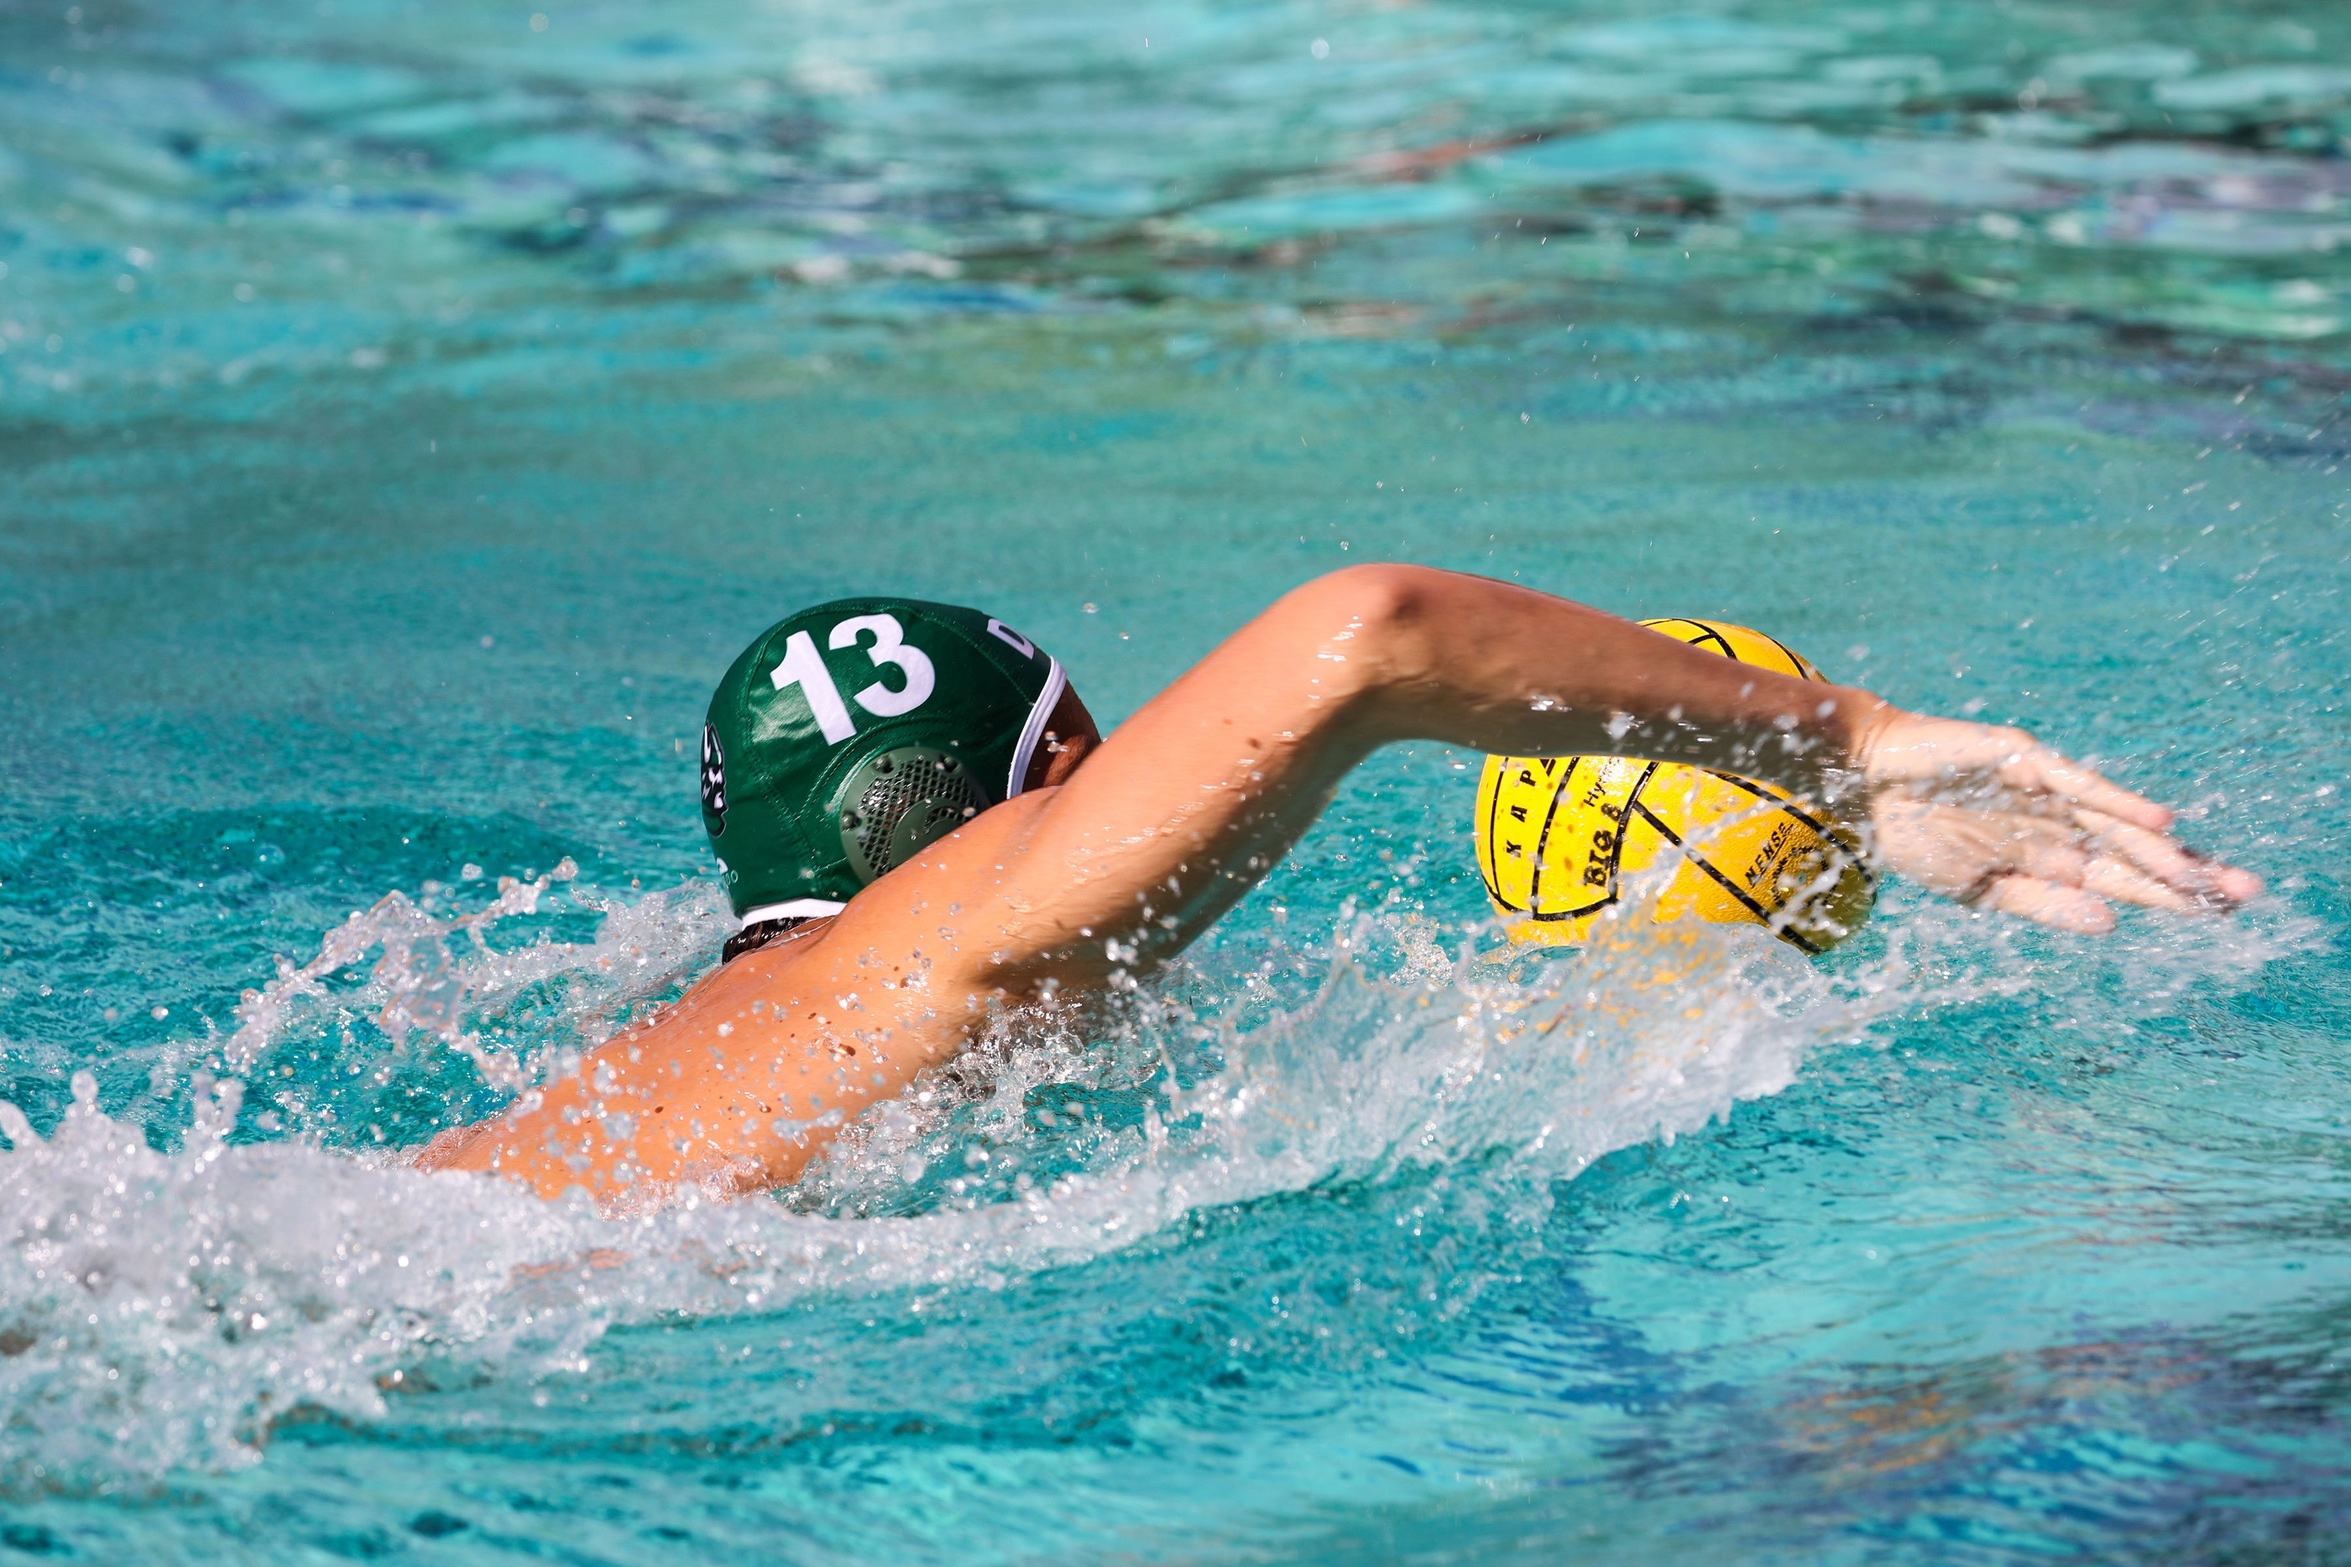 Men's Water Polo finishes in 3rd place at NorCal Championships